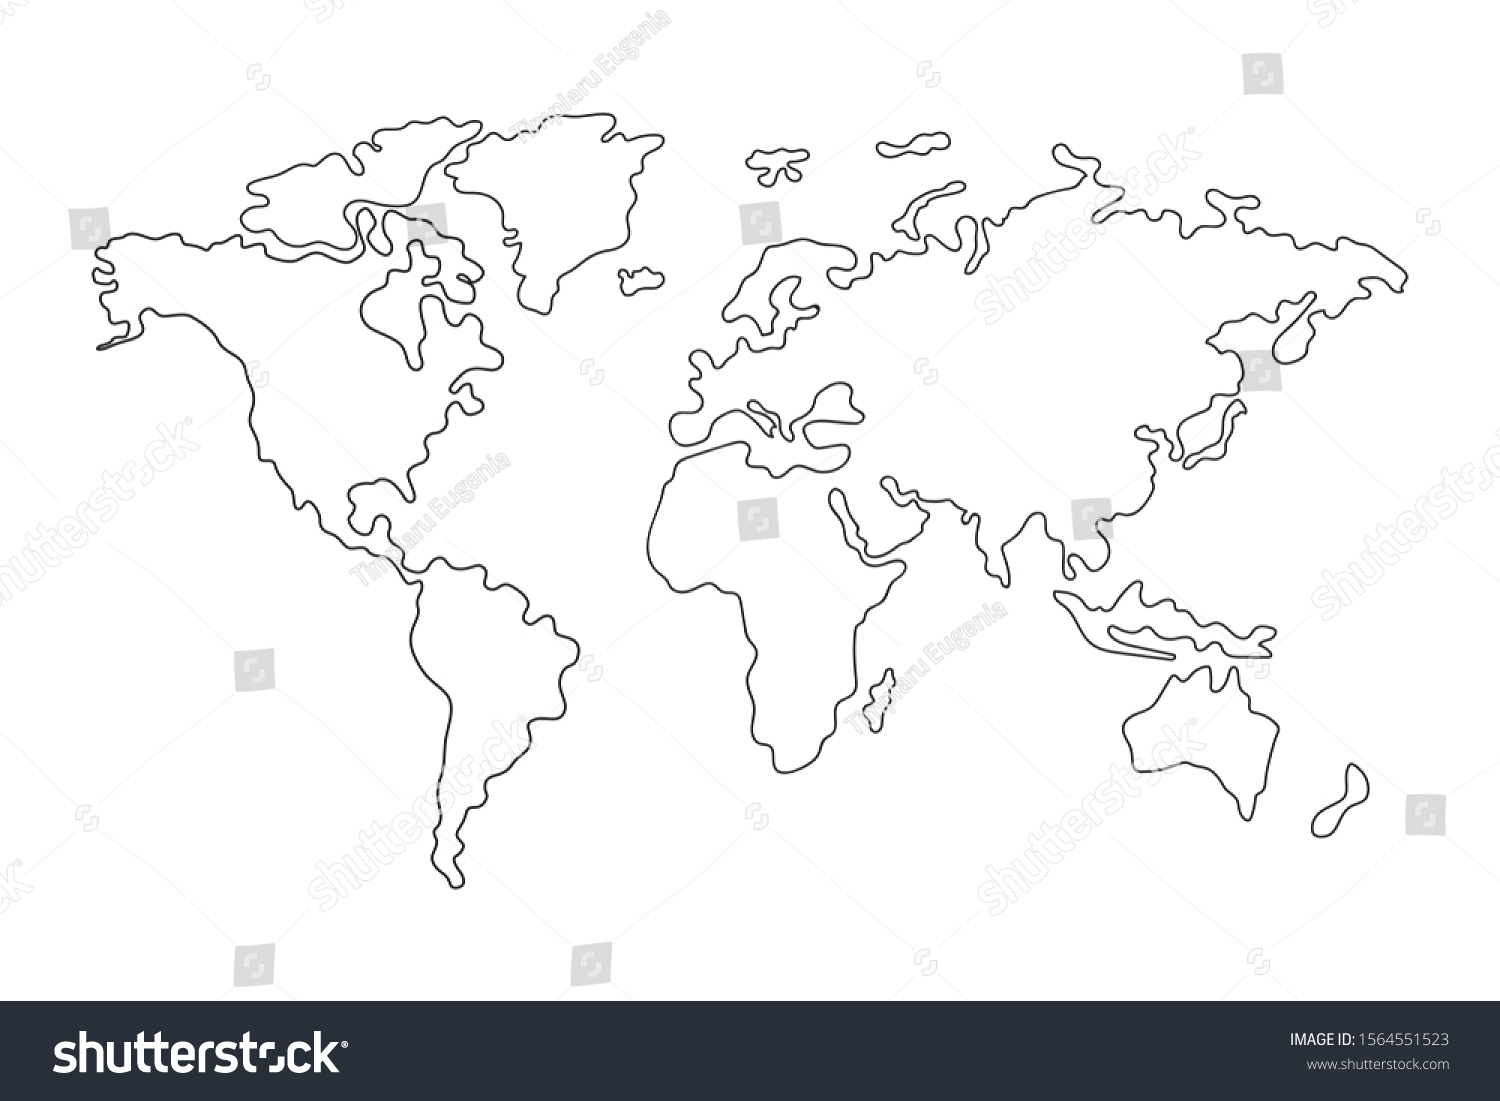 World Map Vector Illustration Isolated Stock Vector (Royalty Free ...